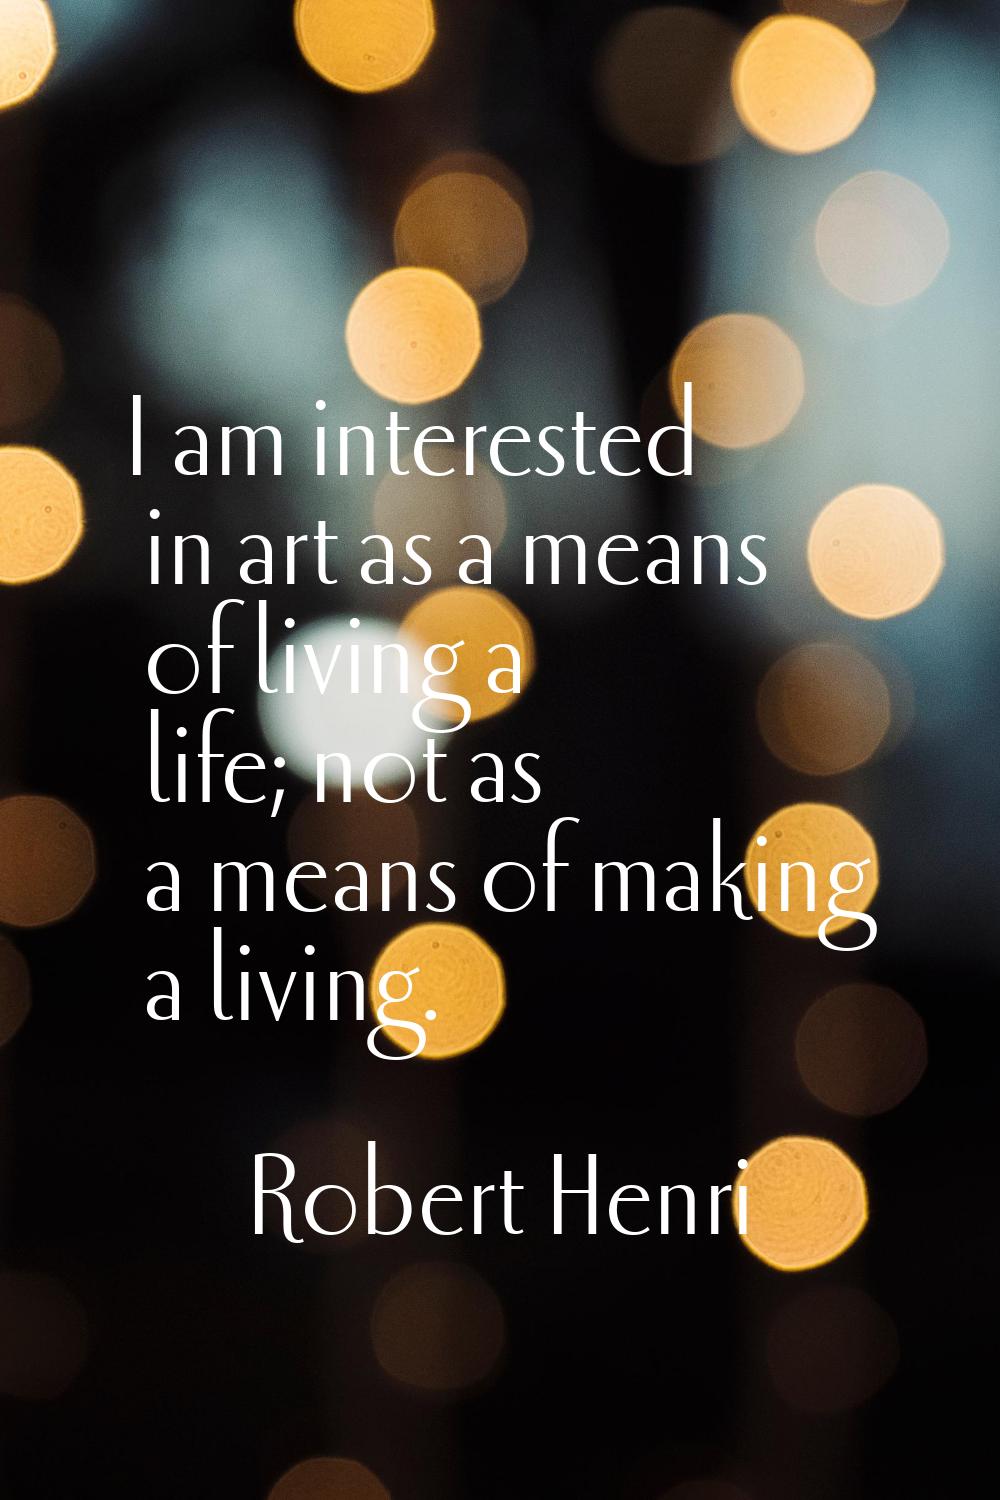 I am interested in art as a means of living a life; not as a means of making a living.